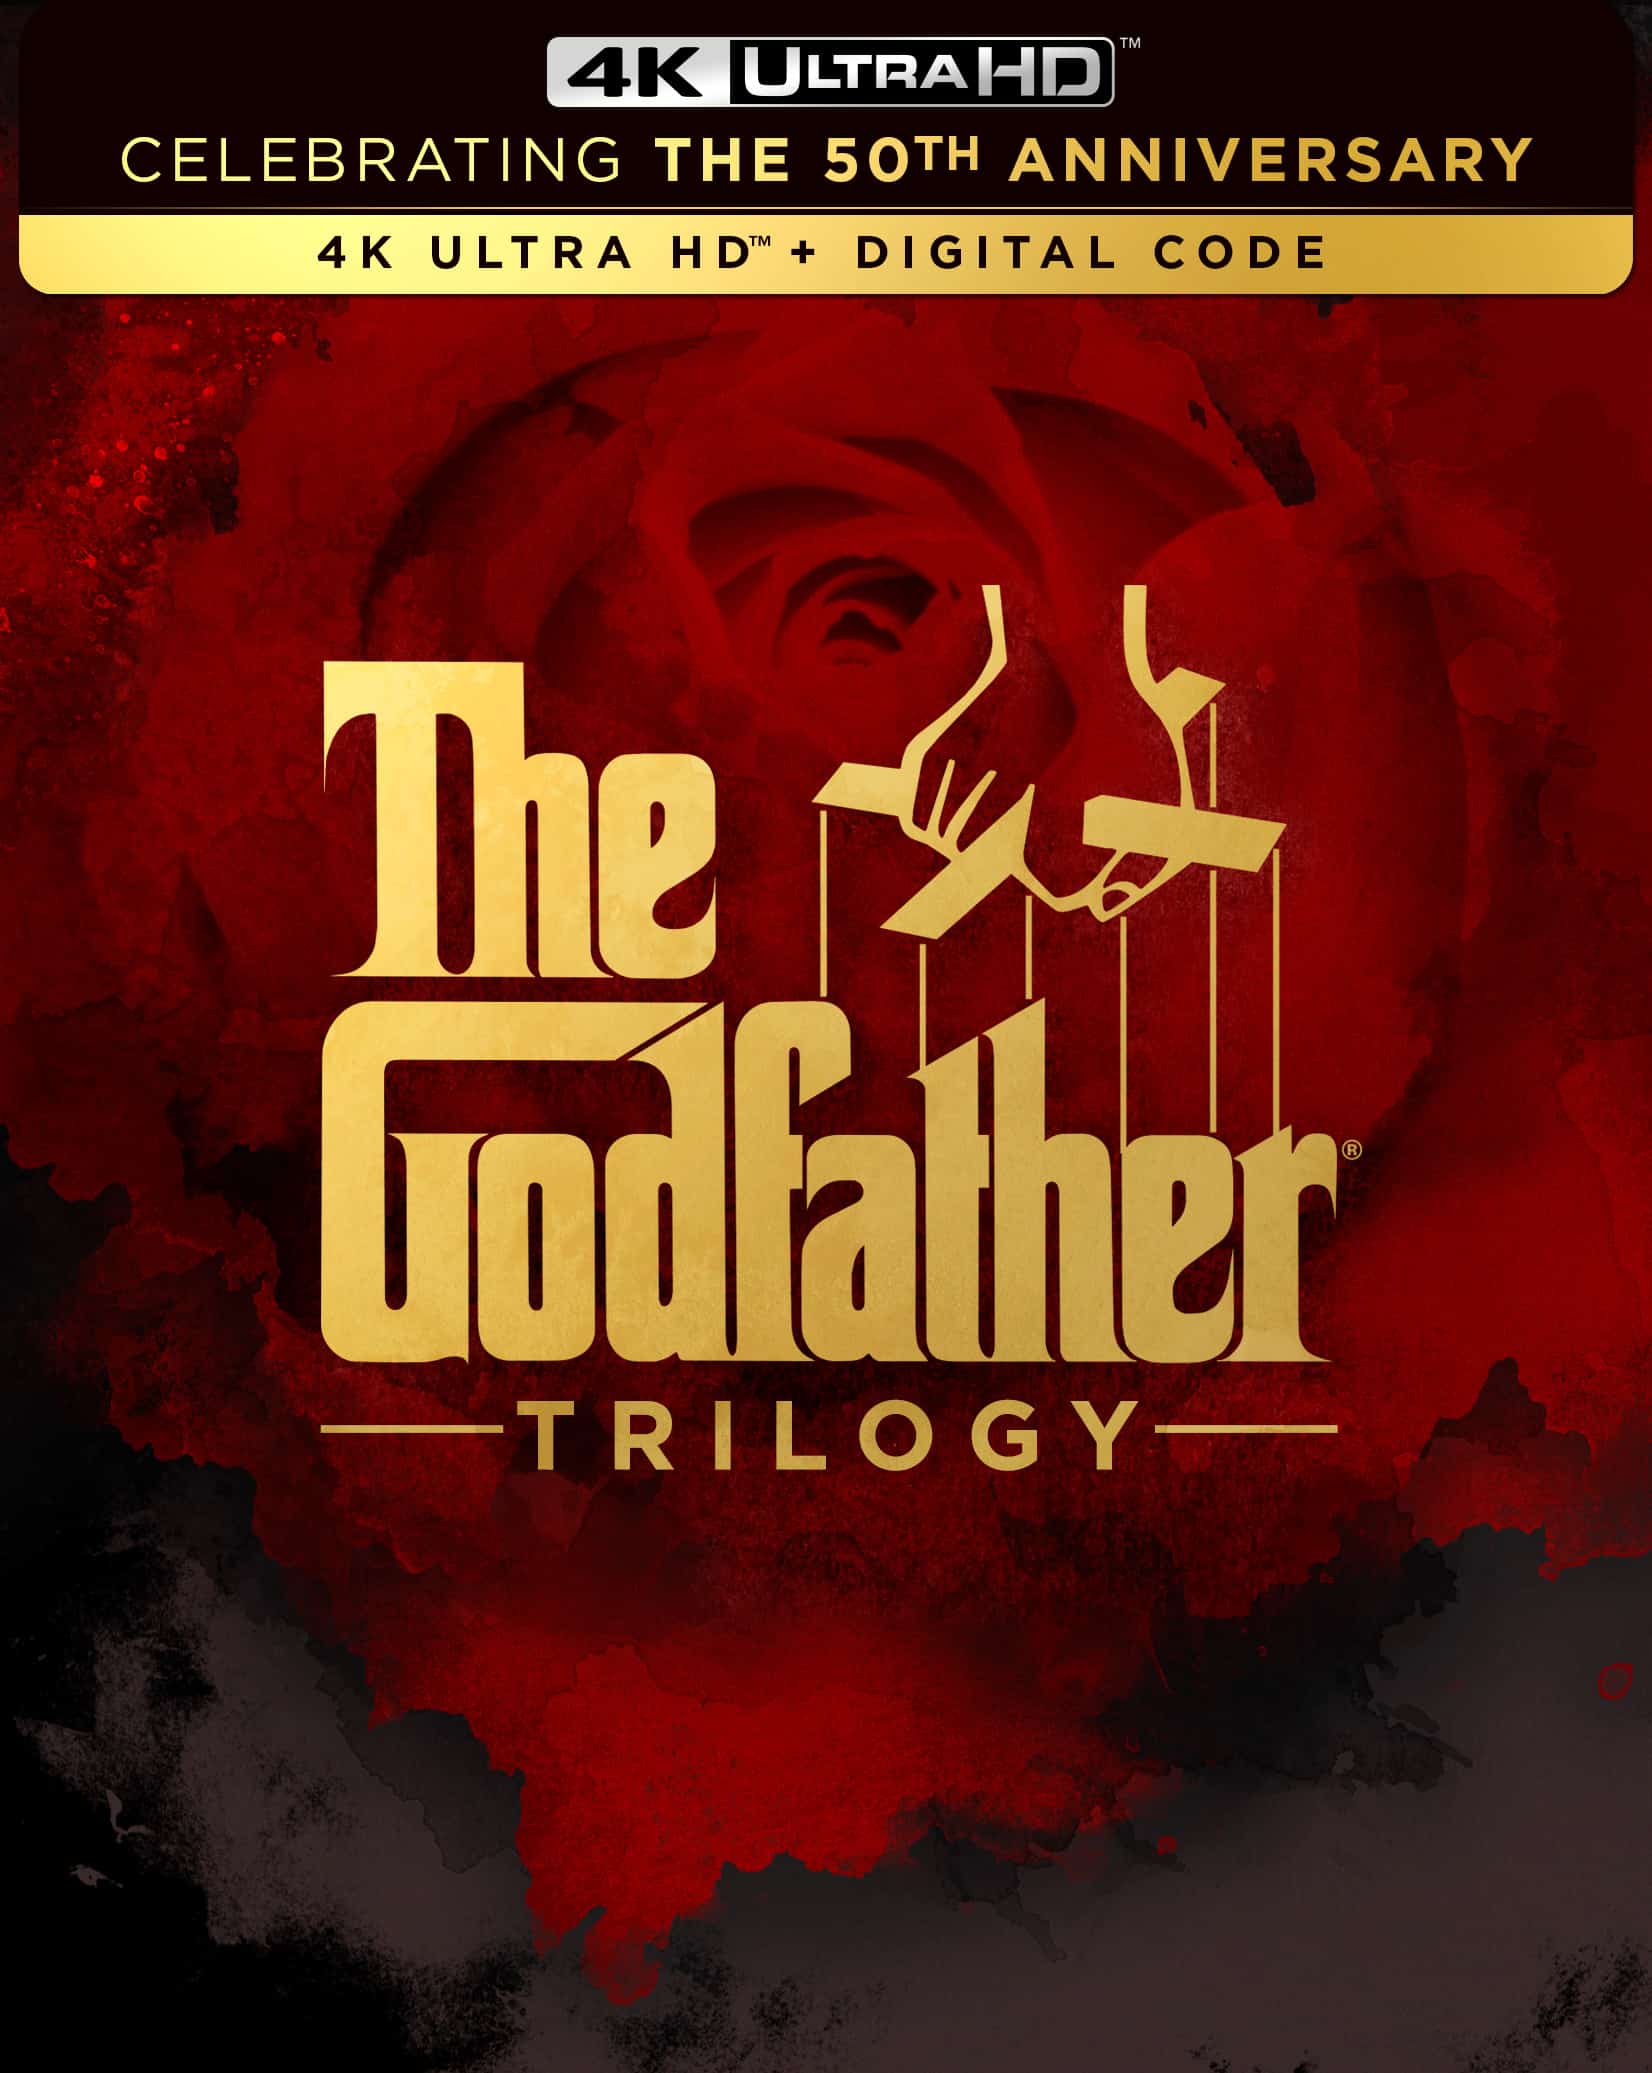 The Godfather turns 50 with a trip back to theaters and a 4K UHD debut 2